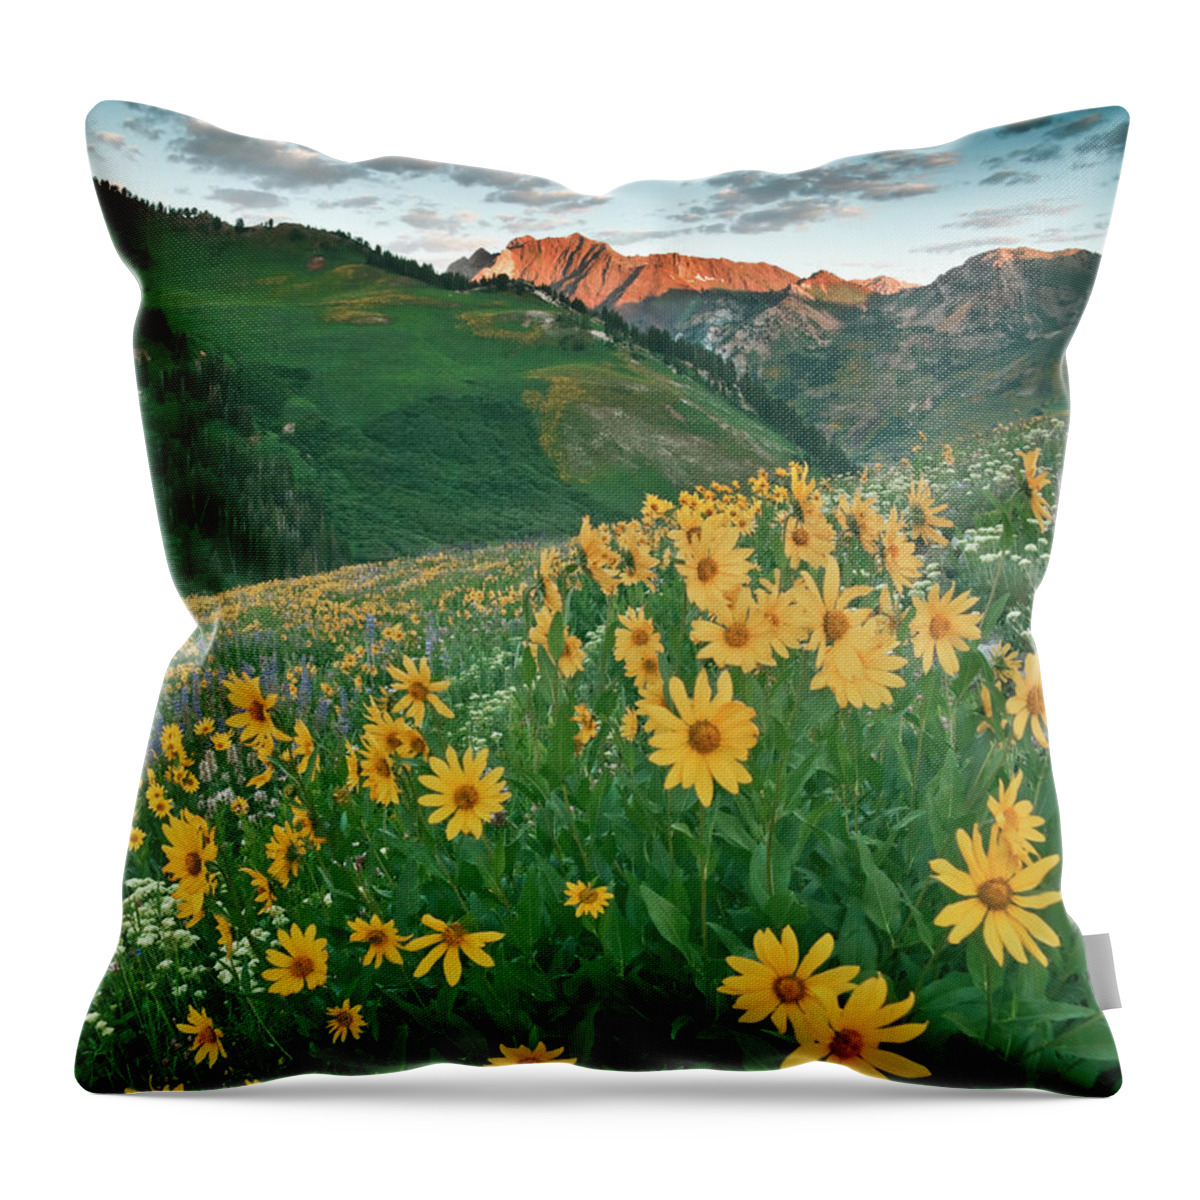 Albion Basin Throw Pillow featuring the photograph Albion Basin Wildflowers #4 by Douglas Pulsipher